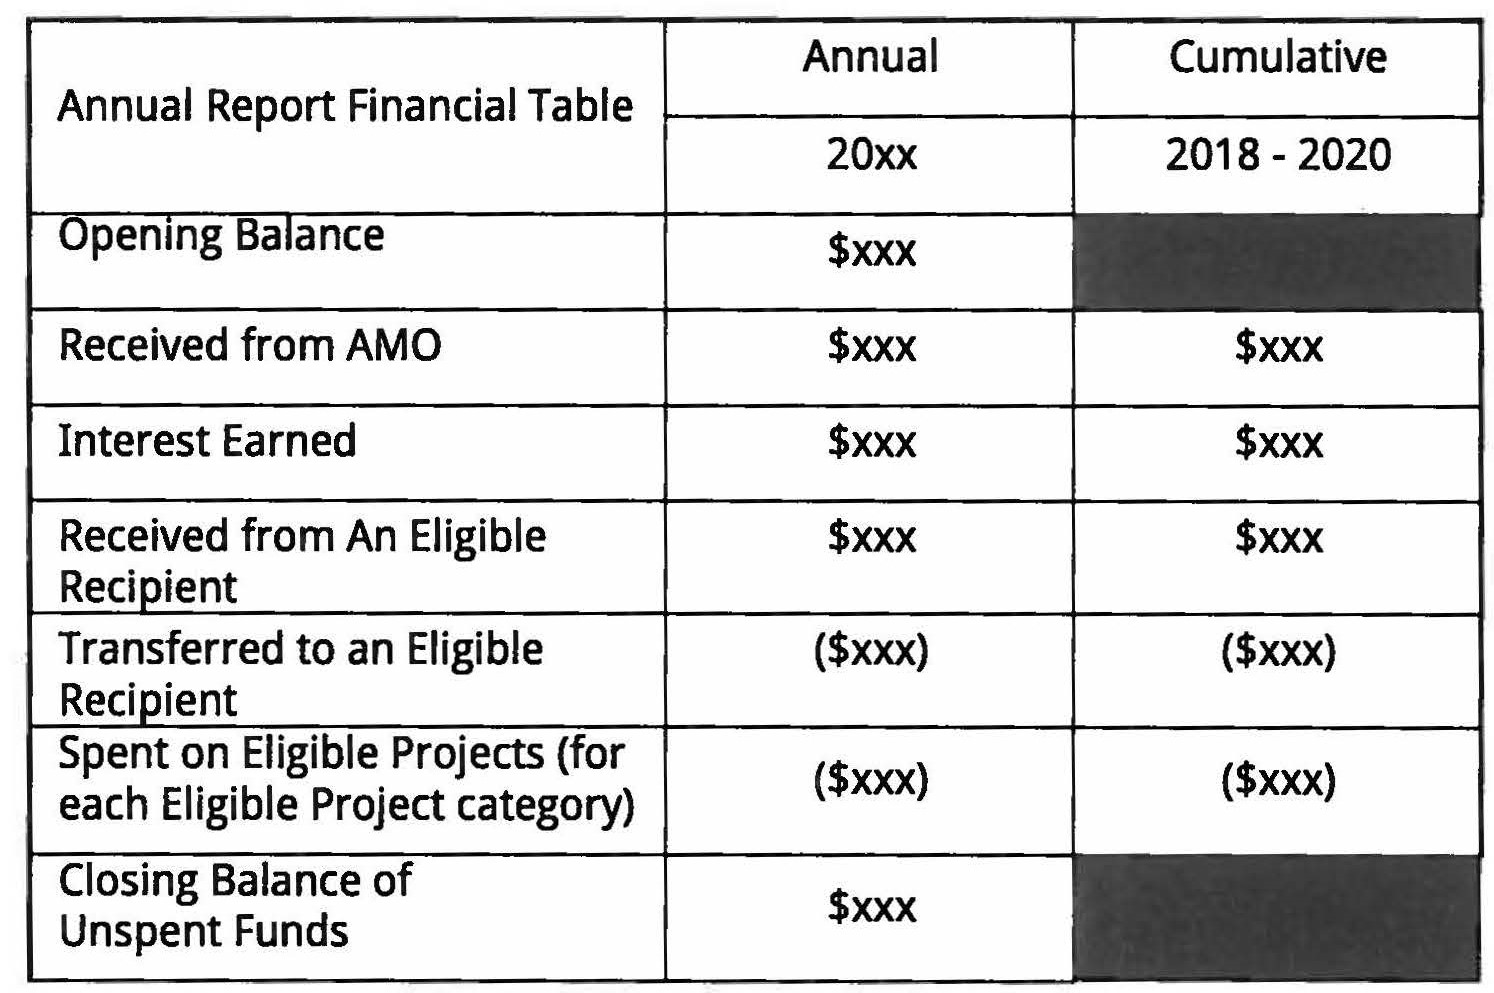 table showing the financial reporting expectations